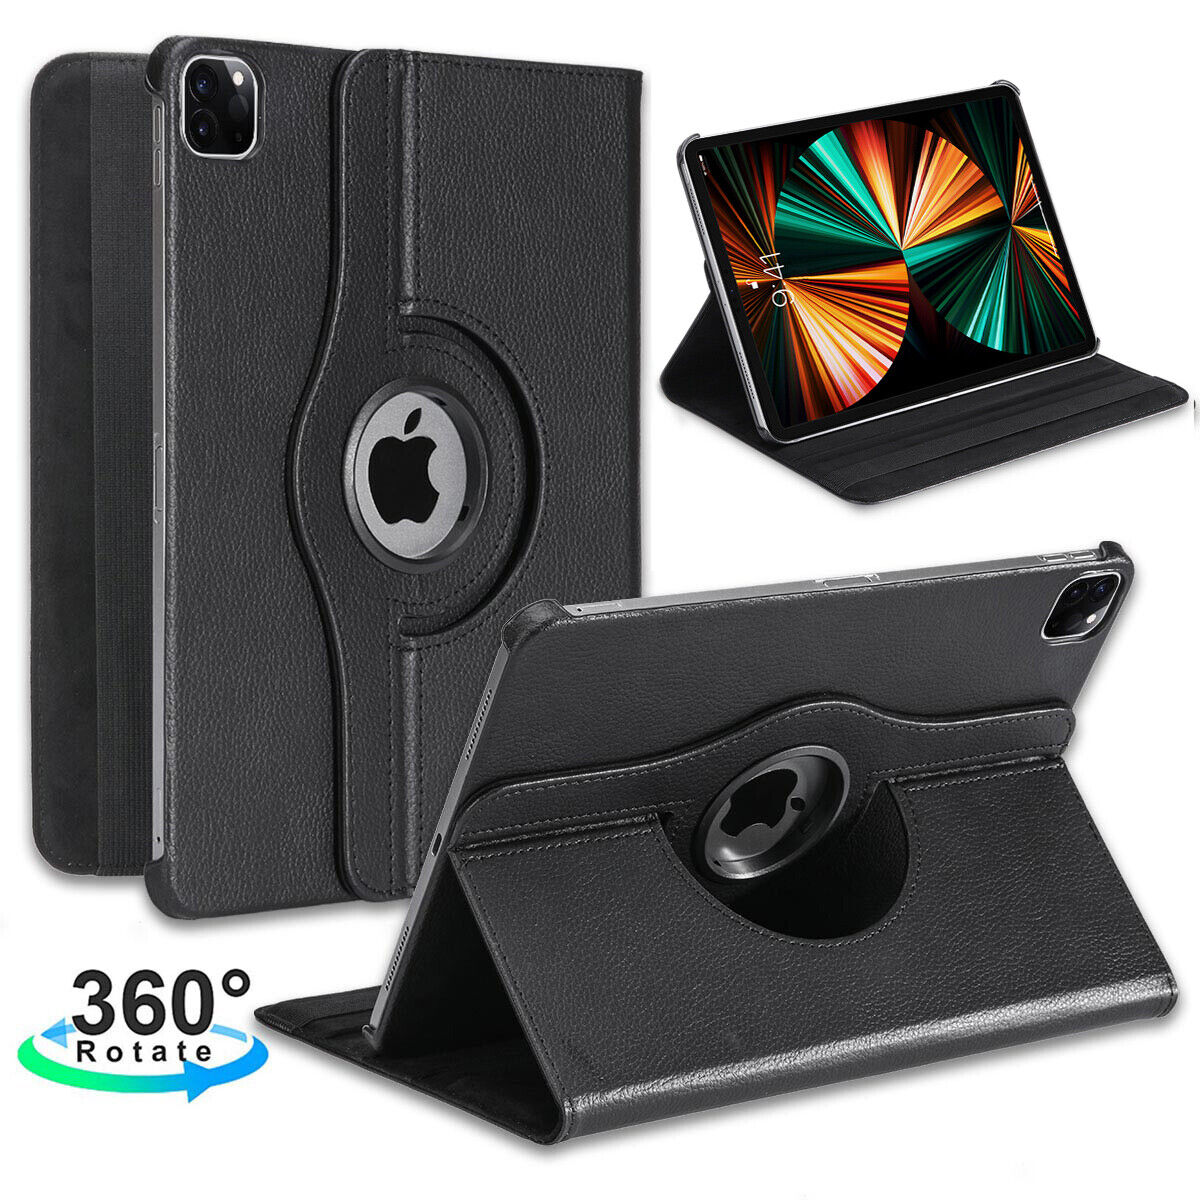 Stylish Rotating PU Leather Smart Case Cover For Apple iPad AIR 1 2 3 10.5